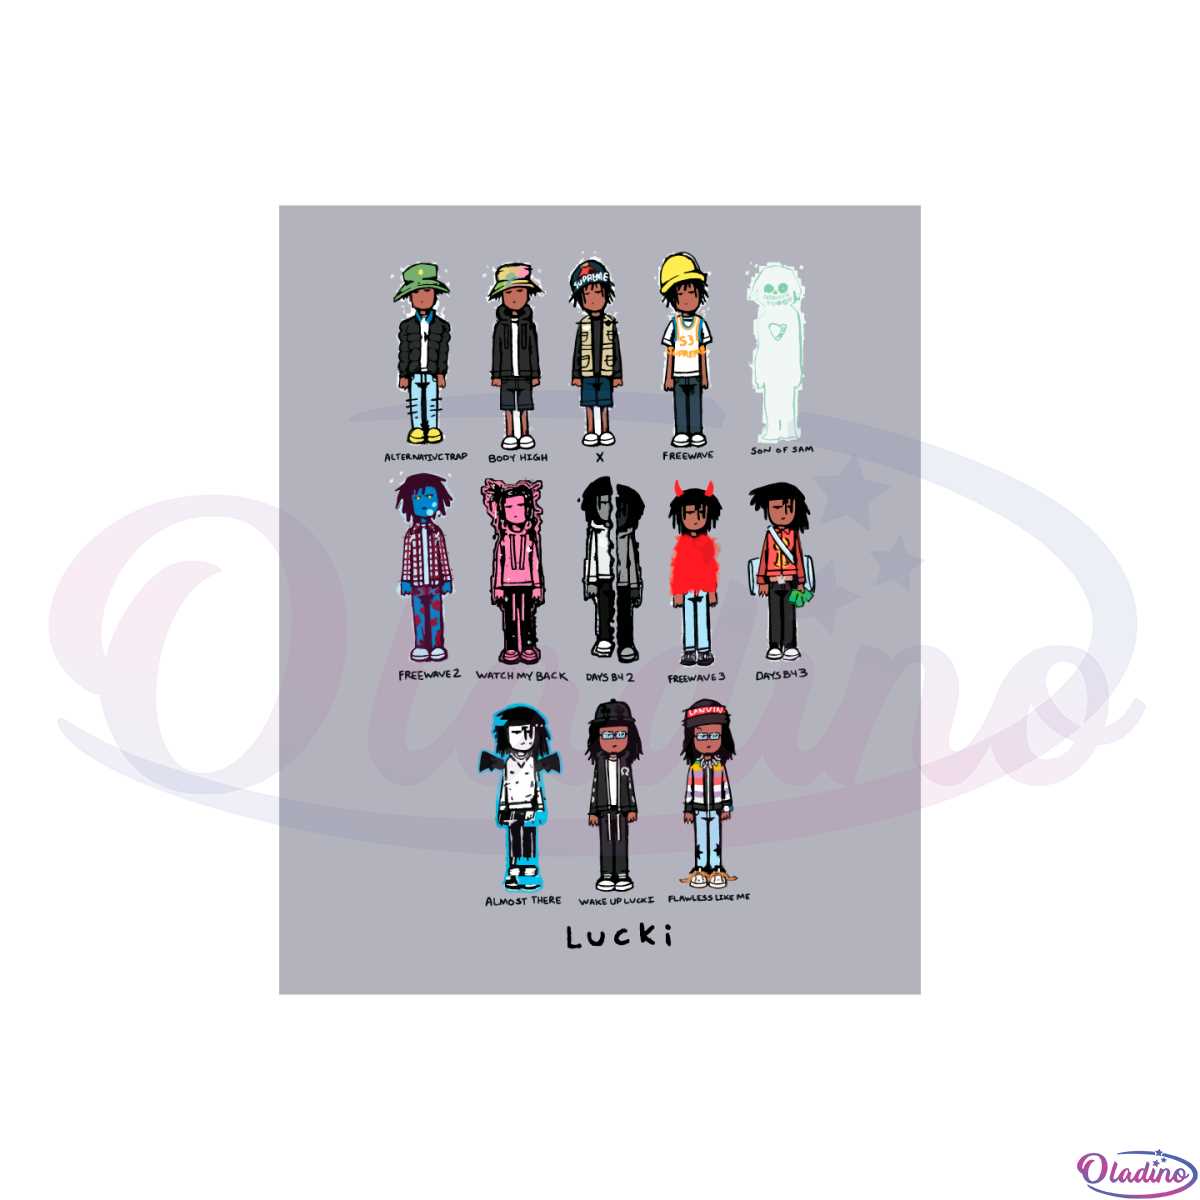 lucki-fans-full-albums-svg-best-graphic-designs-cutting-files